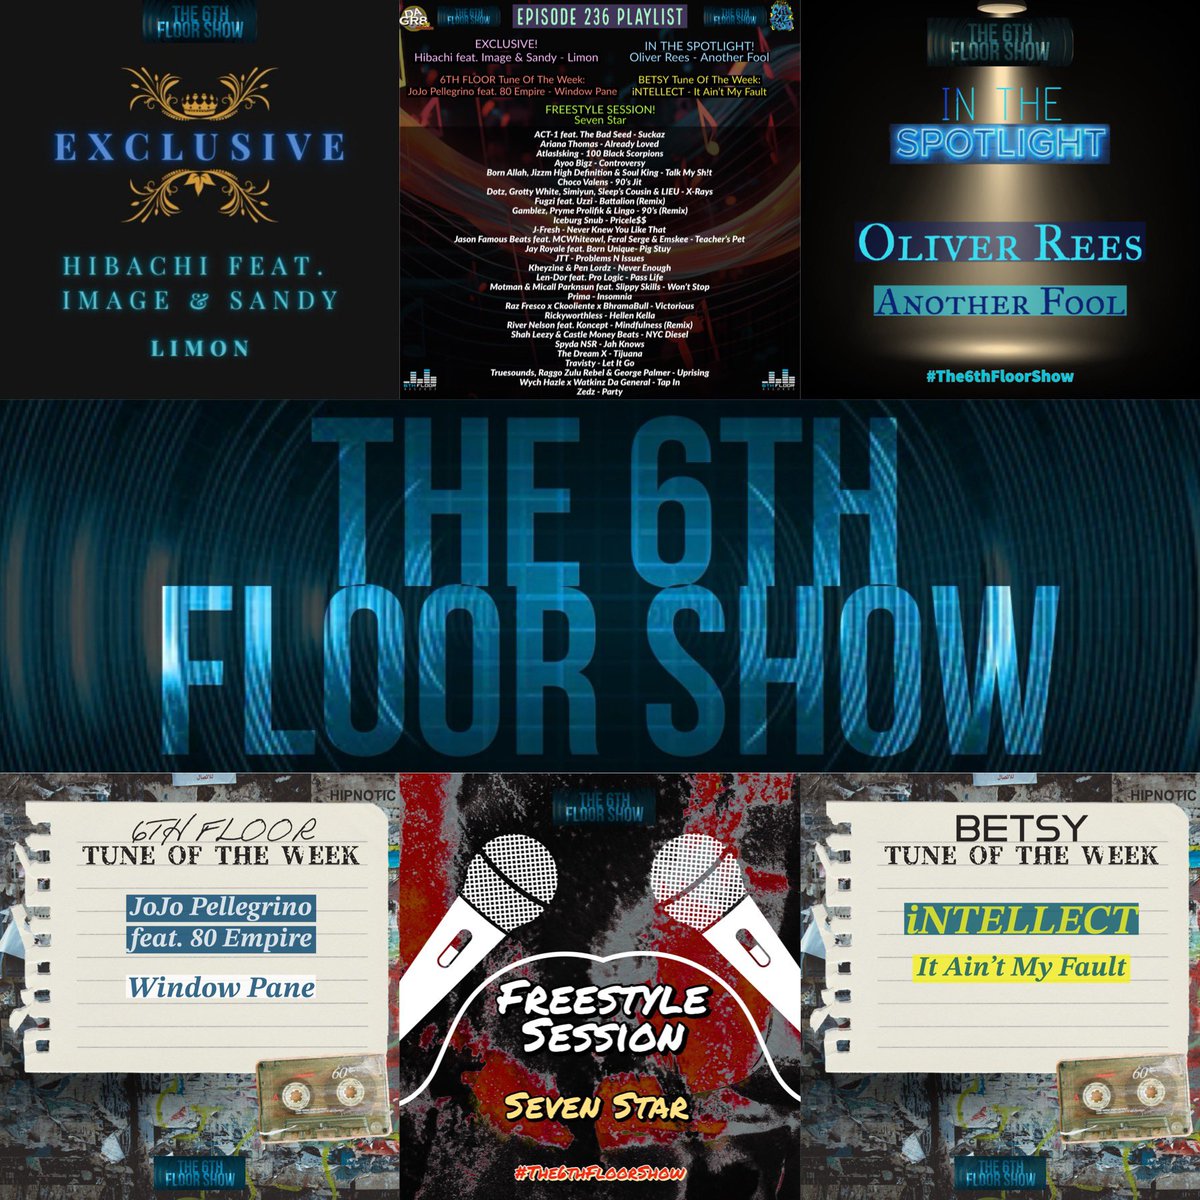 ‼️#OutNow ‼️ Episode 236 of #The6thFloorShow is available now on #ApplePodcasts #AmazonMusic #Mediafire #Audiomack & #Deezer podcasts.apple.com/gb/podcast/the… music.amazon.co.uk/podcasts/cde4a… mediafire.com/file/1gtrieyzj… audiomack.com/the-6th-floor-… deezer.page.link/TnwWrZerSAoaWF…